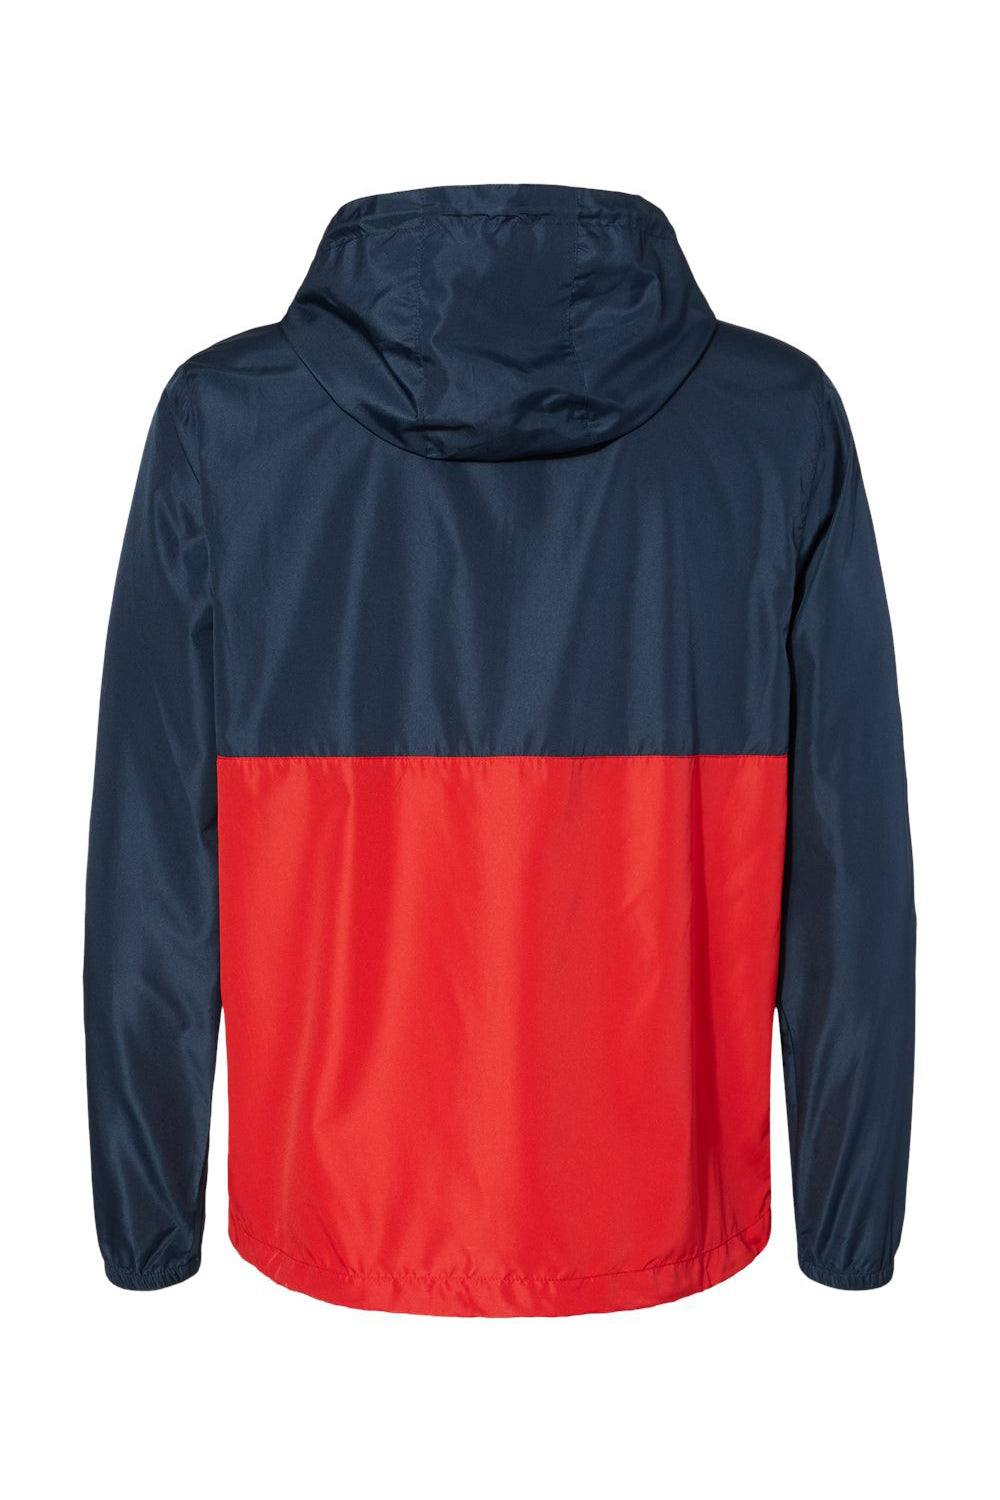 Independent Trading Co. EXP54LWP Mens 1/4 Zip Windbreaker Hooded Jacket Classic Navy Blue/Red Flat Back